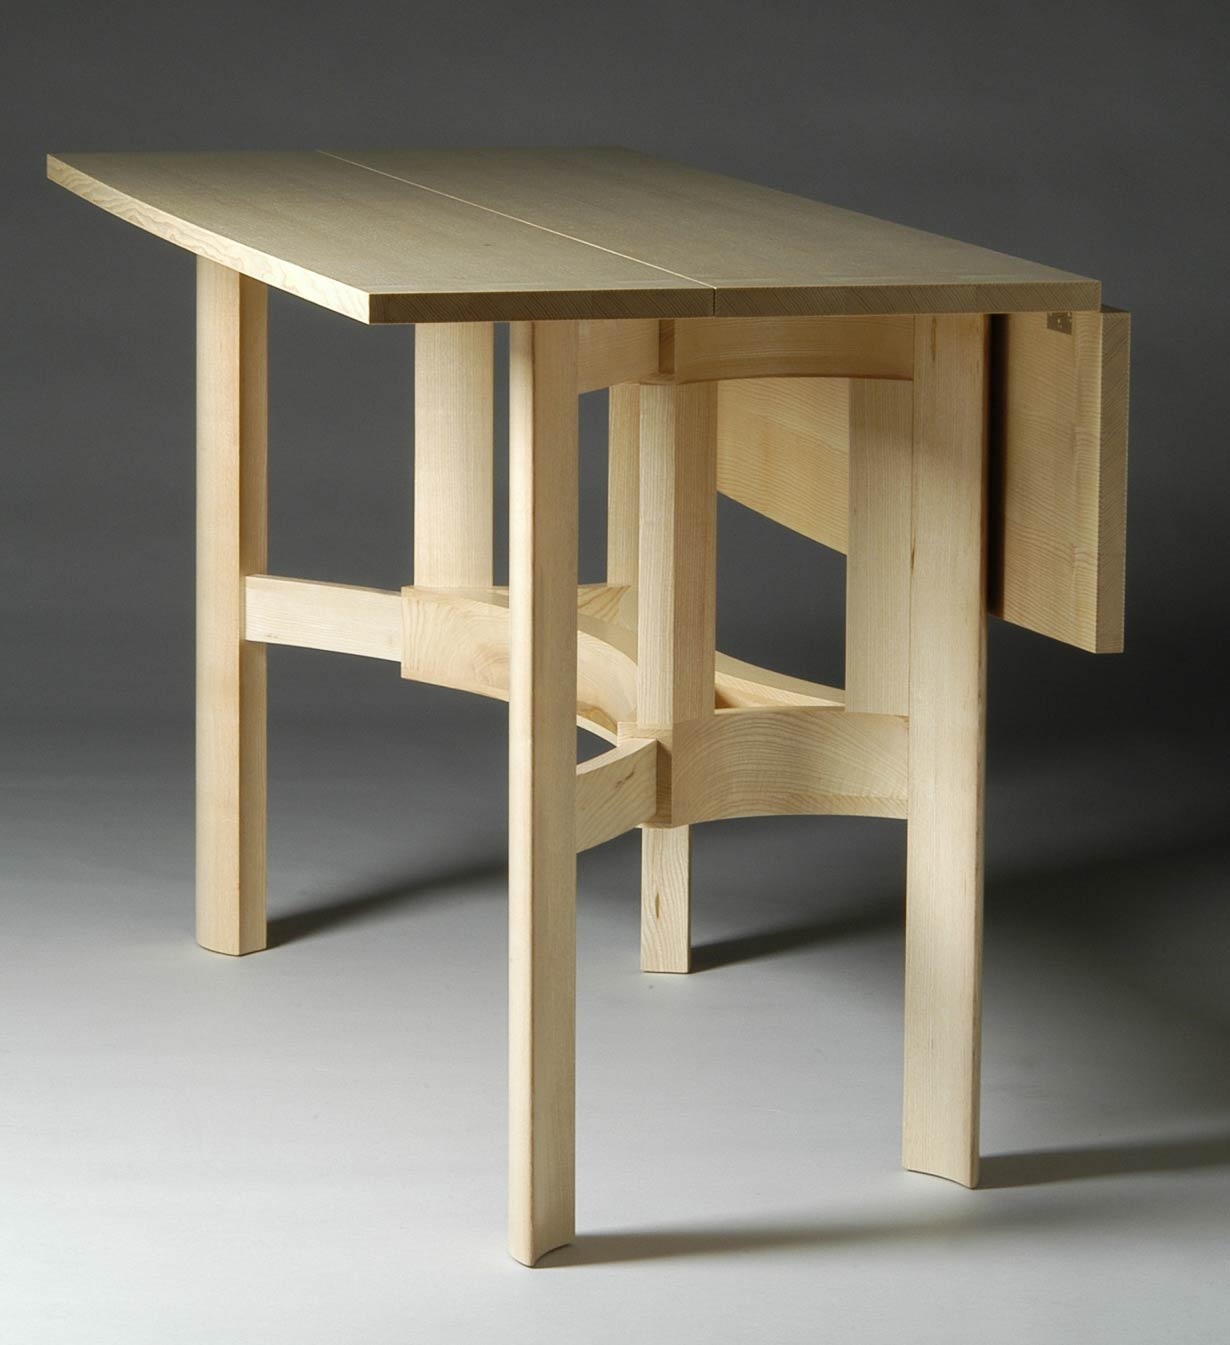 Bespoke Drop Leaf Dining Table In Ash By Furniture Designer Daniel Lacey At Makers Eye Makers Eye